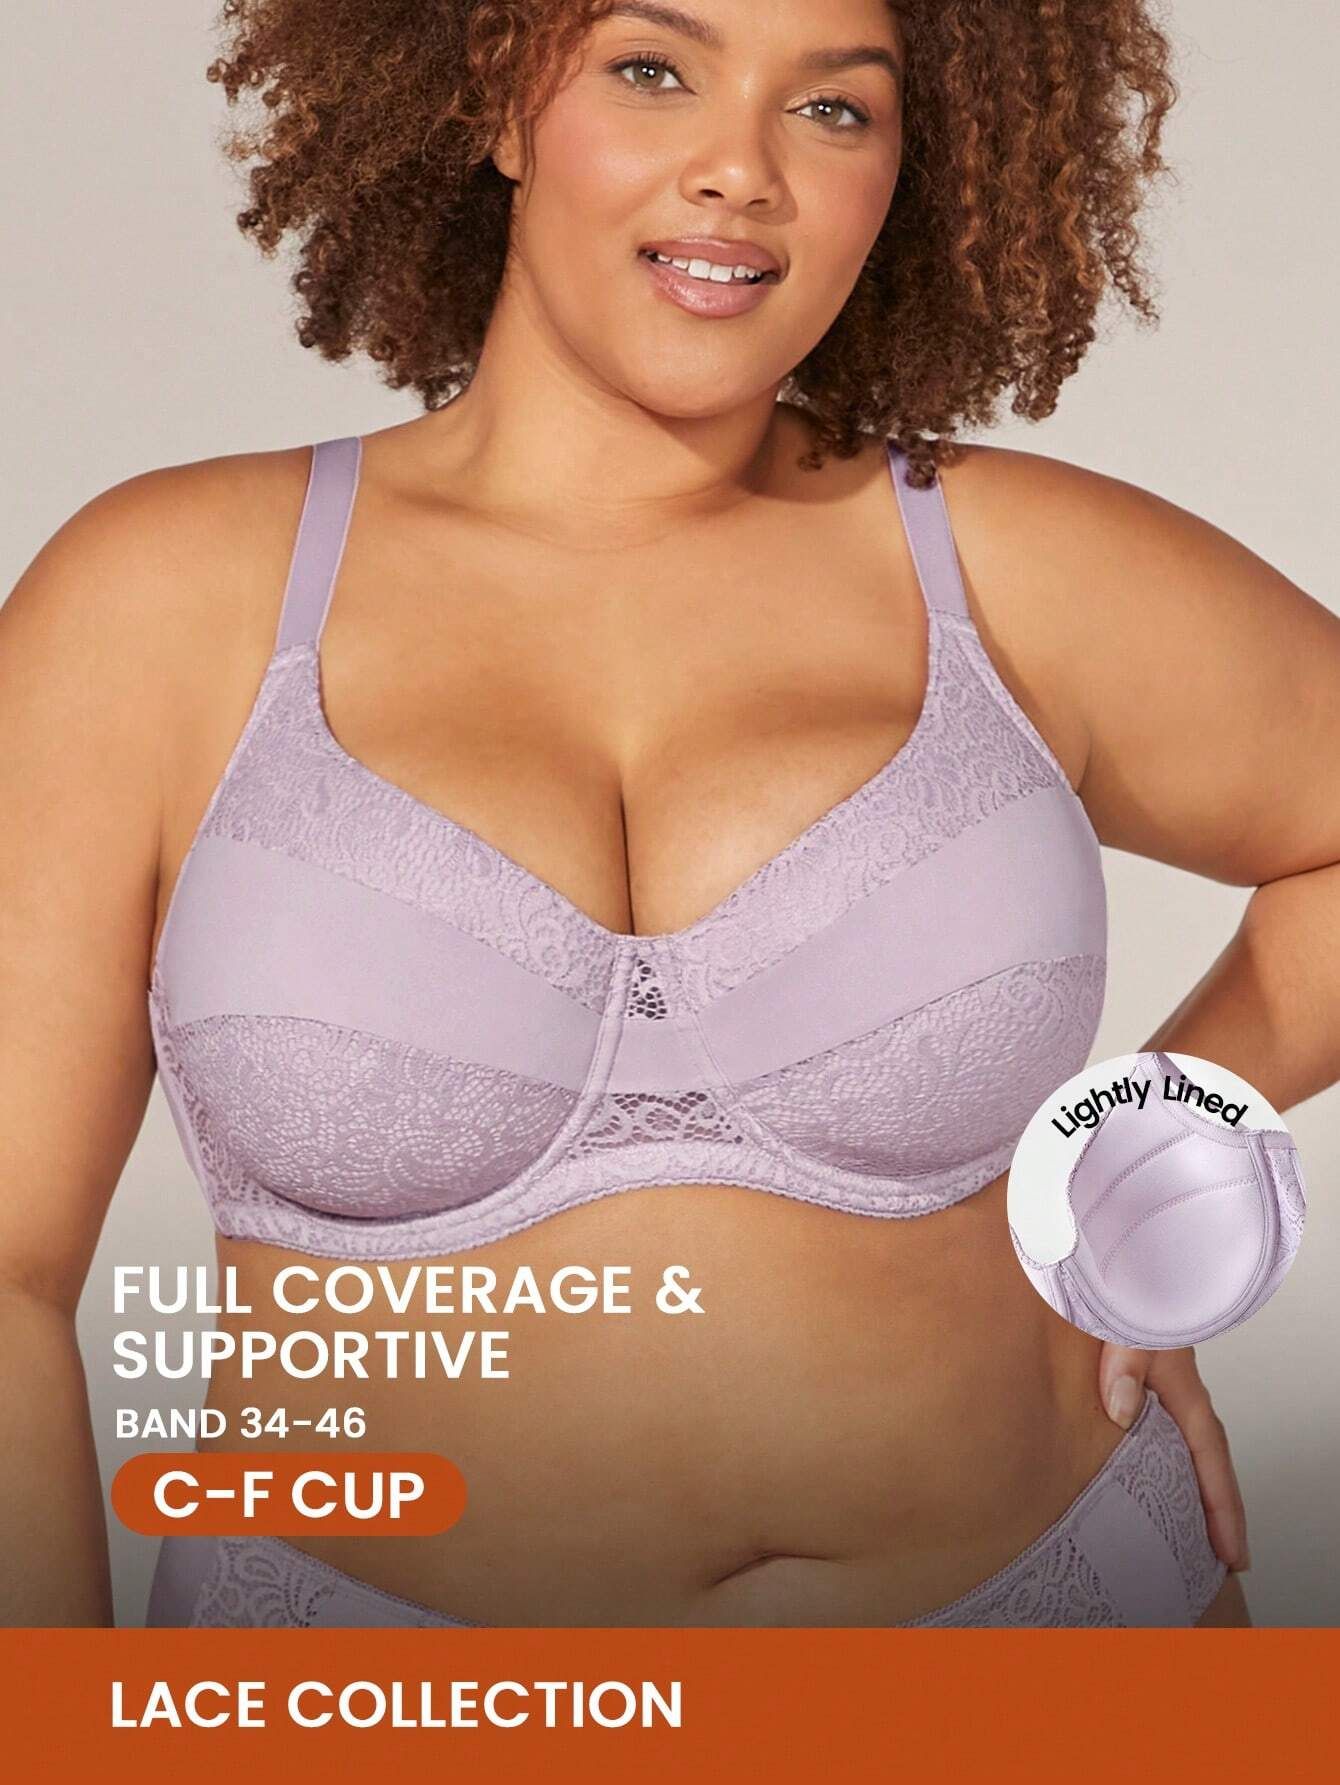 Luvlette Plus Full Coverage Lift Lace Bra | SHEIN